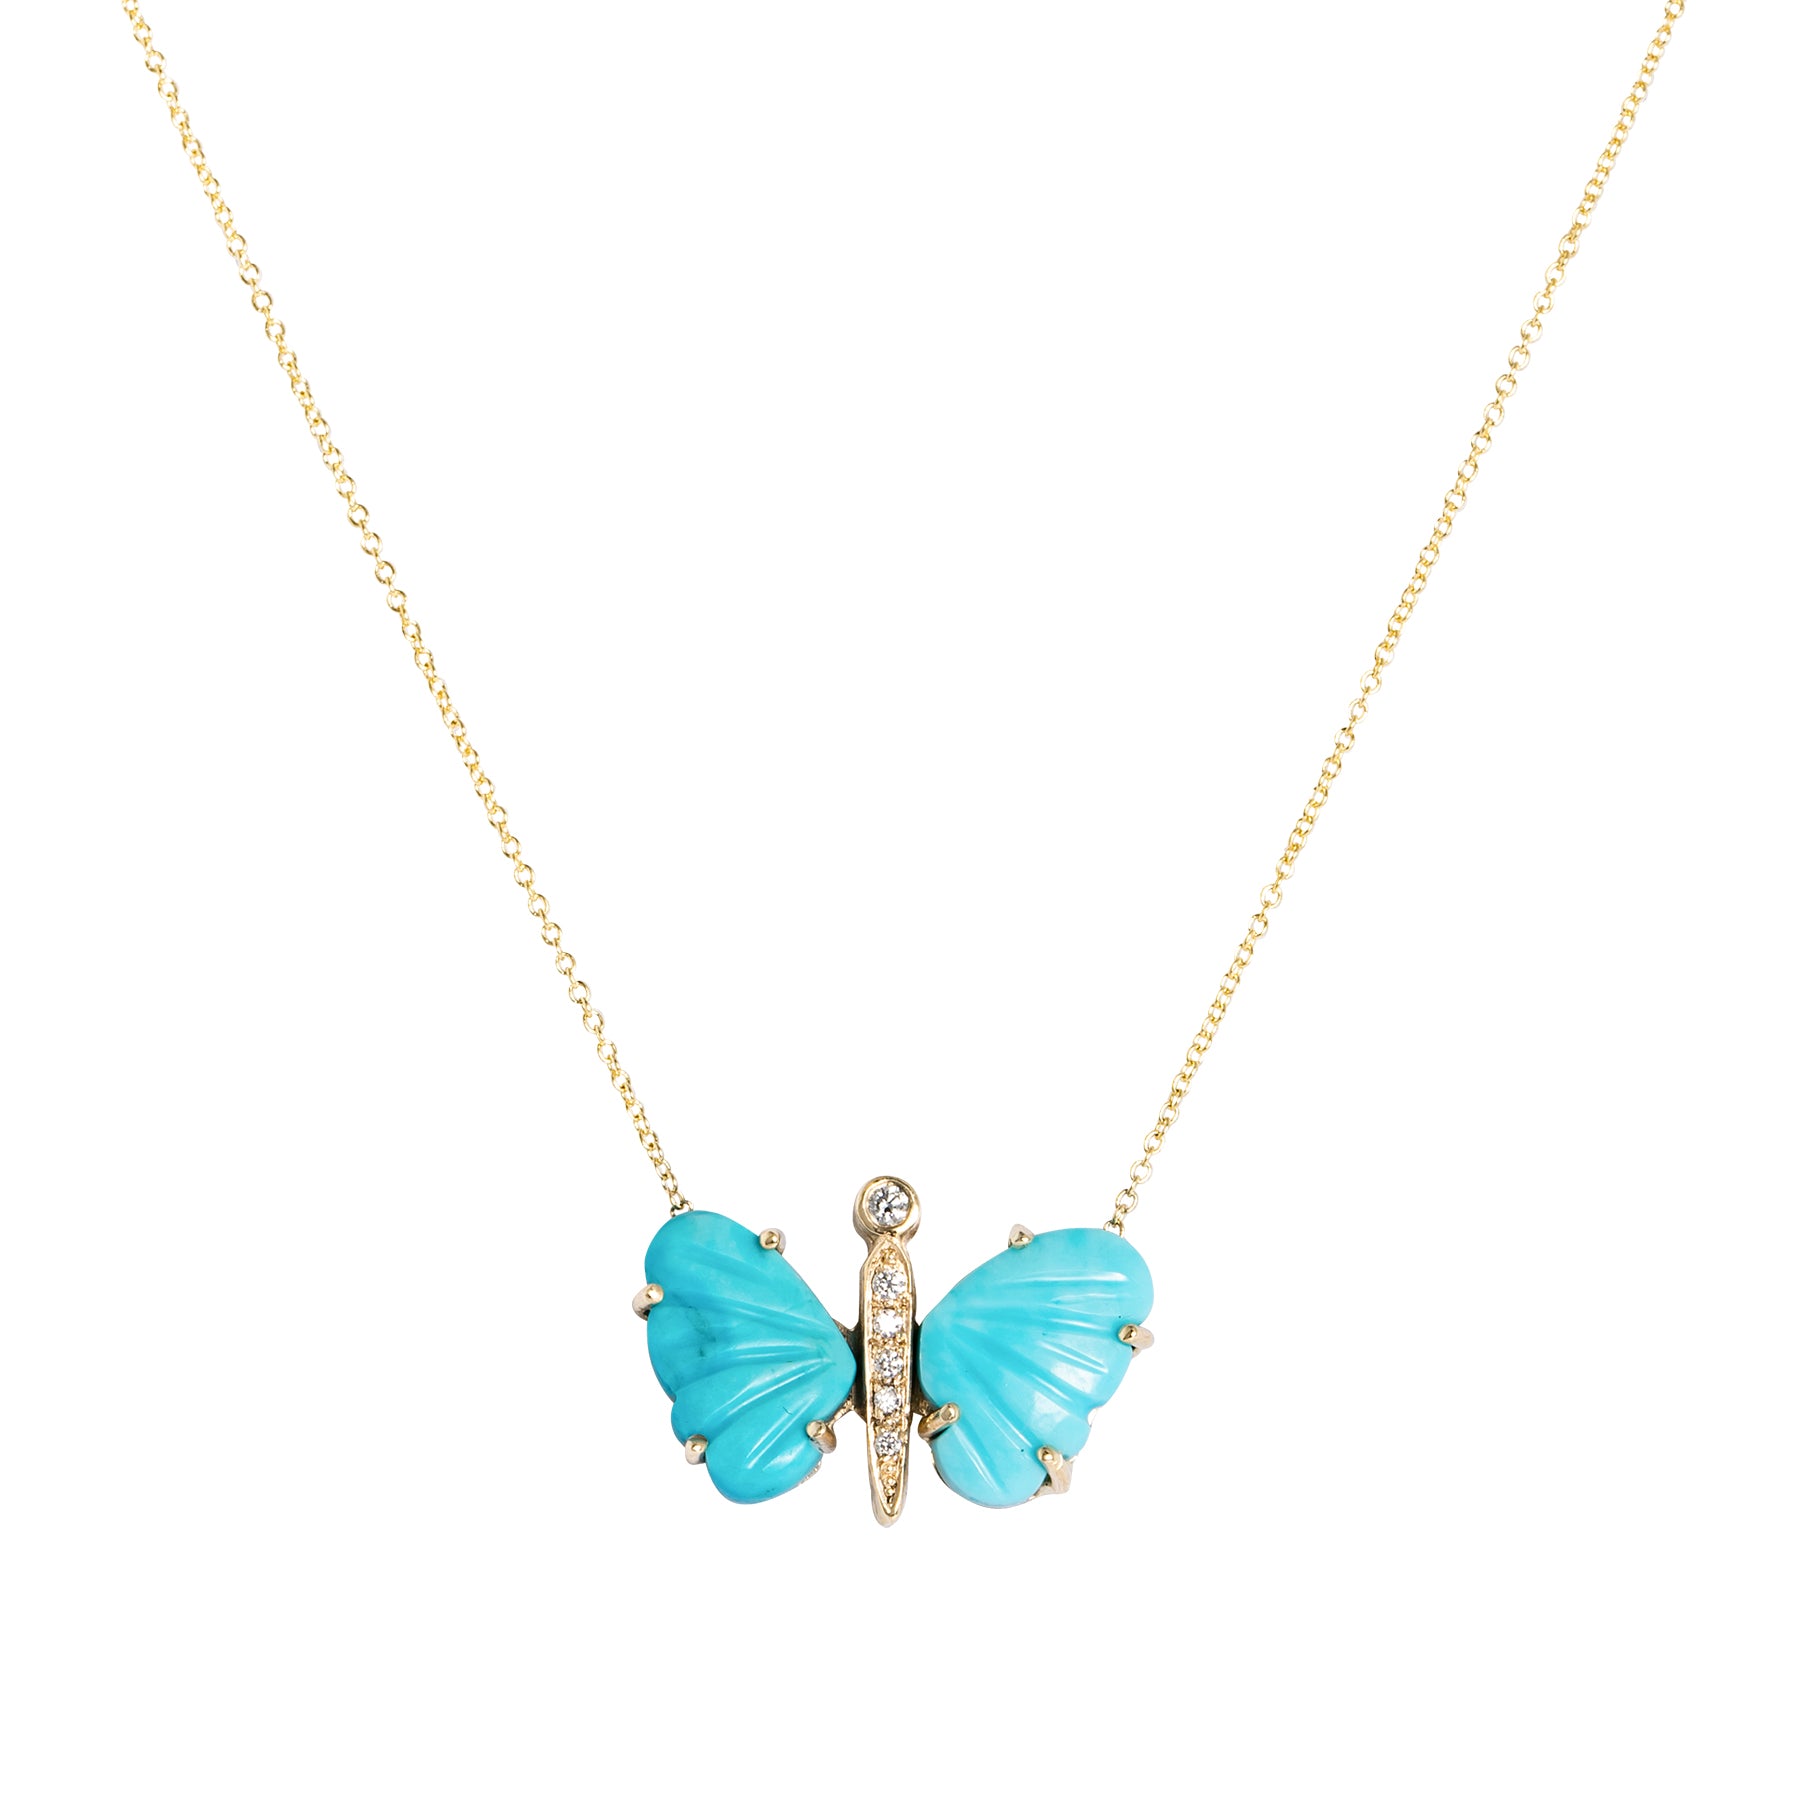 Turquoise Baby Butterfly Diamond Necklace - Nina Segal Jewelry